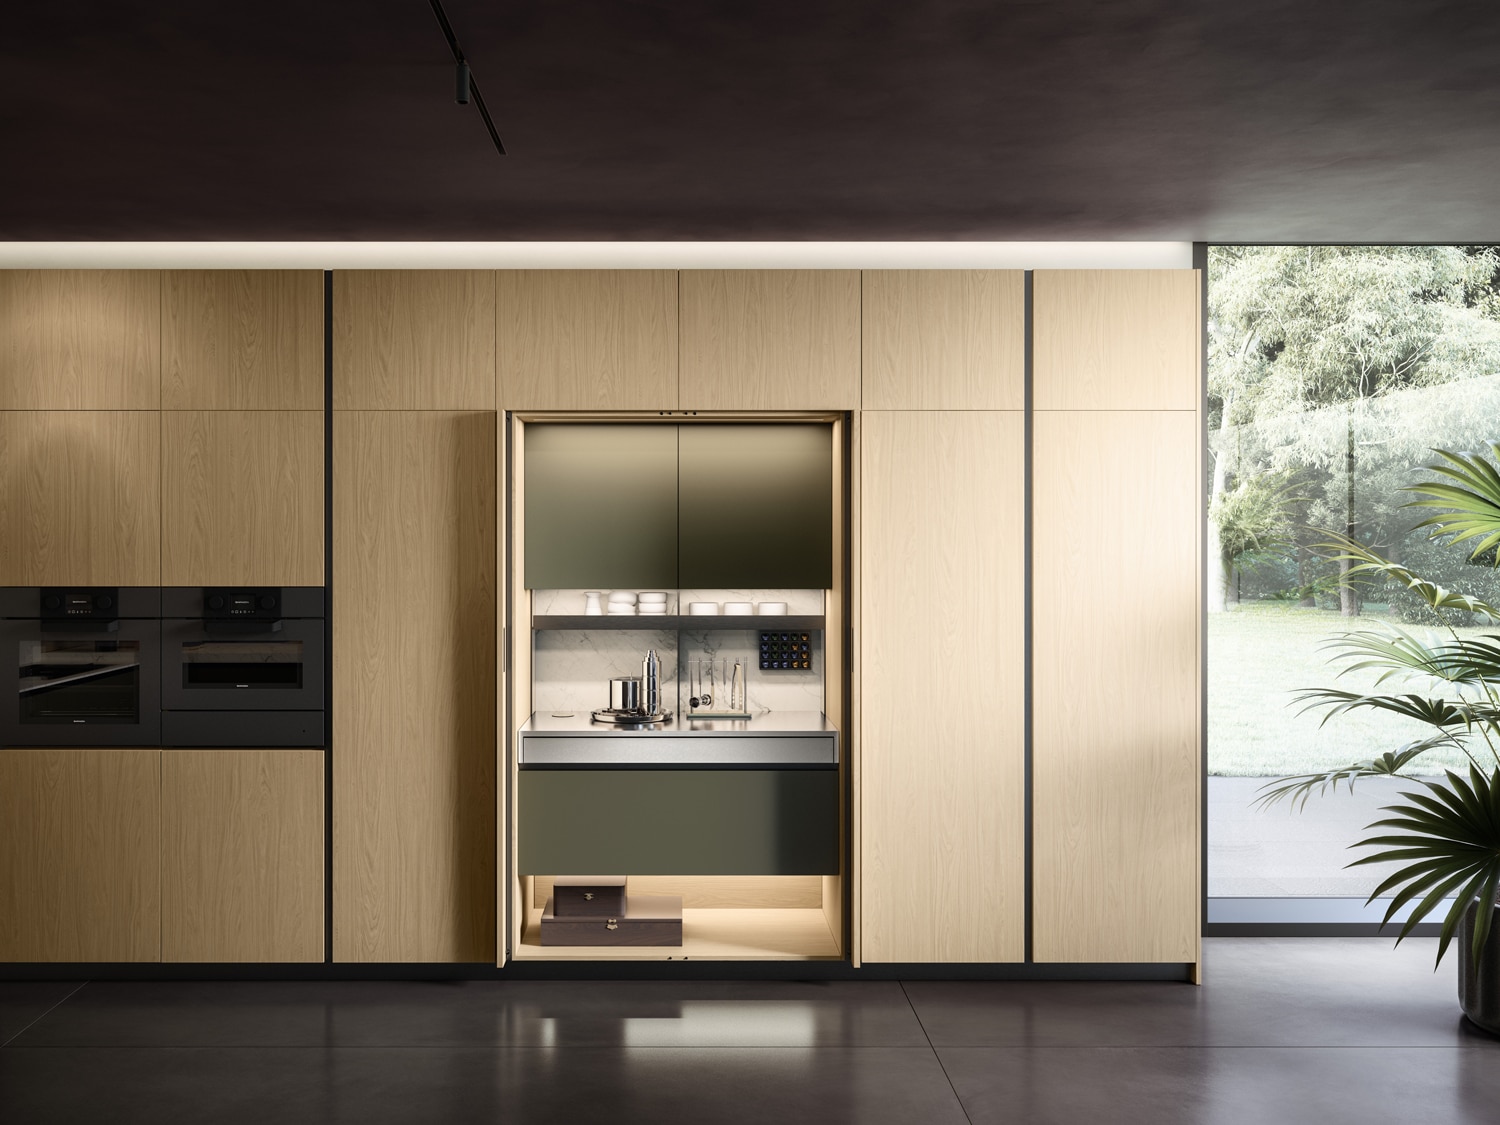 Wing workstation and storage system with pocket doors. Interiors in Verde Foresta matte lacquer and Statuarietto Laminam, in harmony with the rest of the kitchen. A full pull-out stainless steel top extends the usable work surface of the unit.